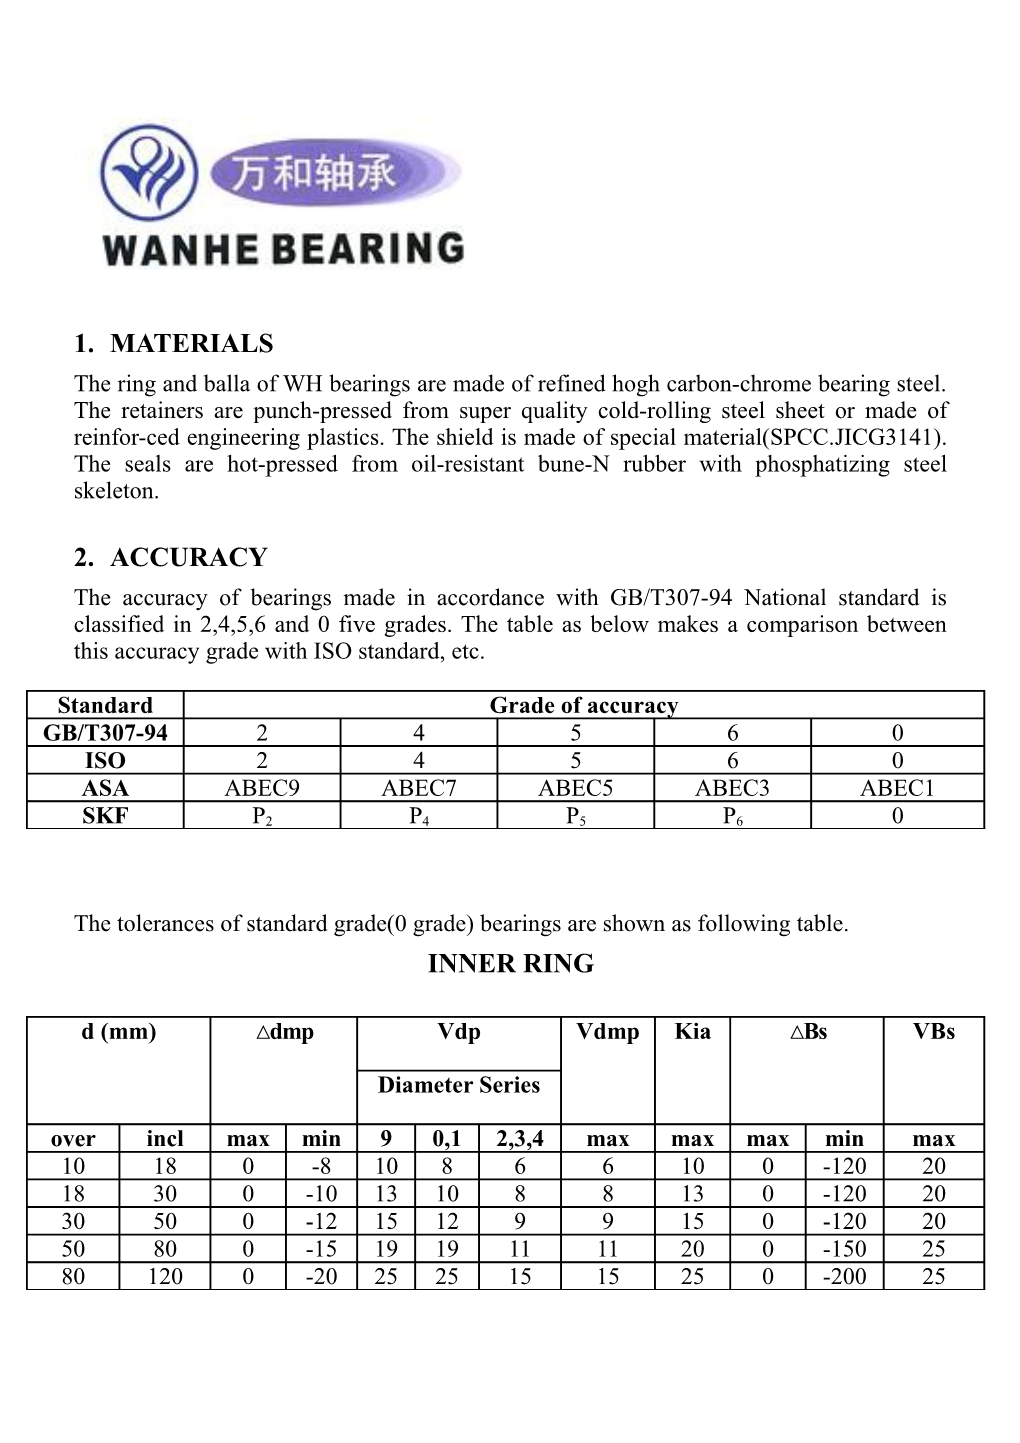 The Tolerances of Standard Grade(0 Grade) Bearings Are Shown As Following Table